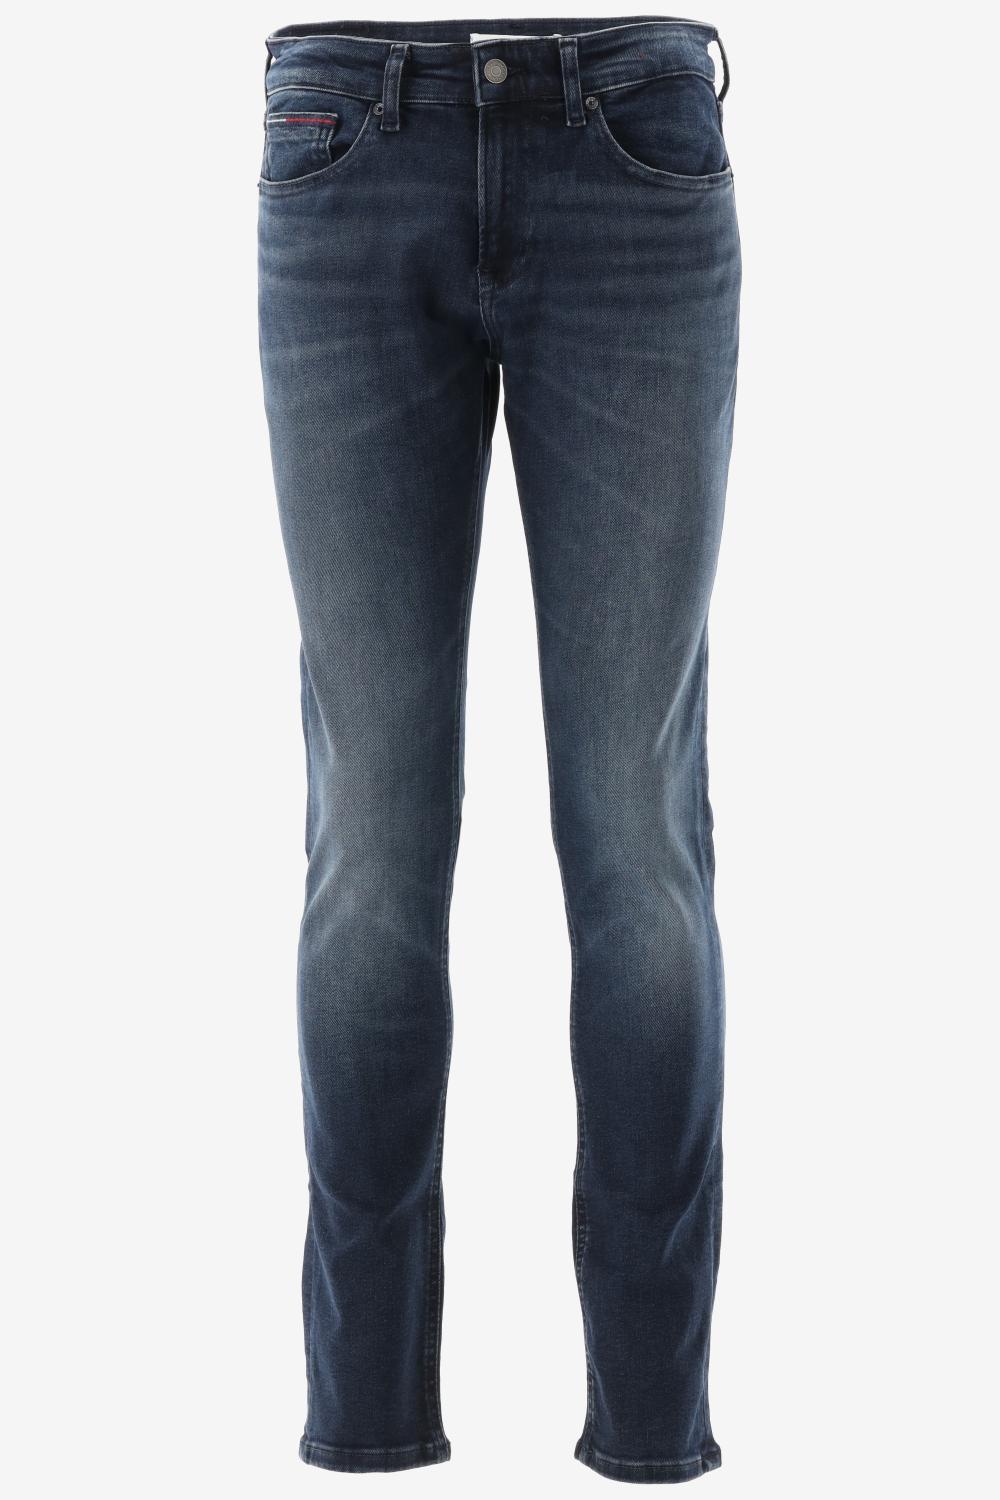 Tommy Jeans Jeans - Slim Fit - Blauw - 32-32